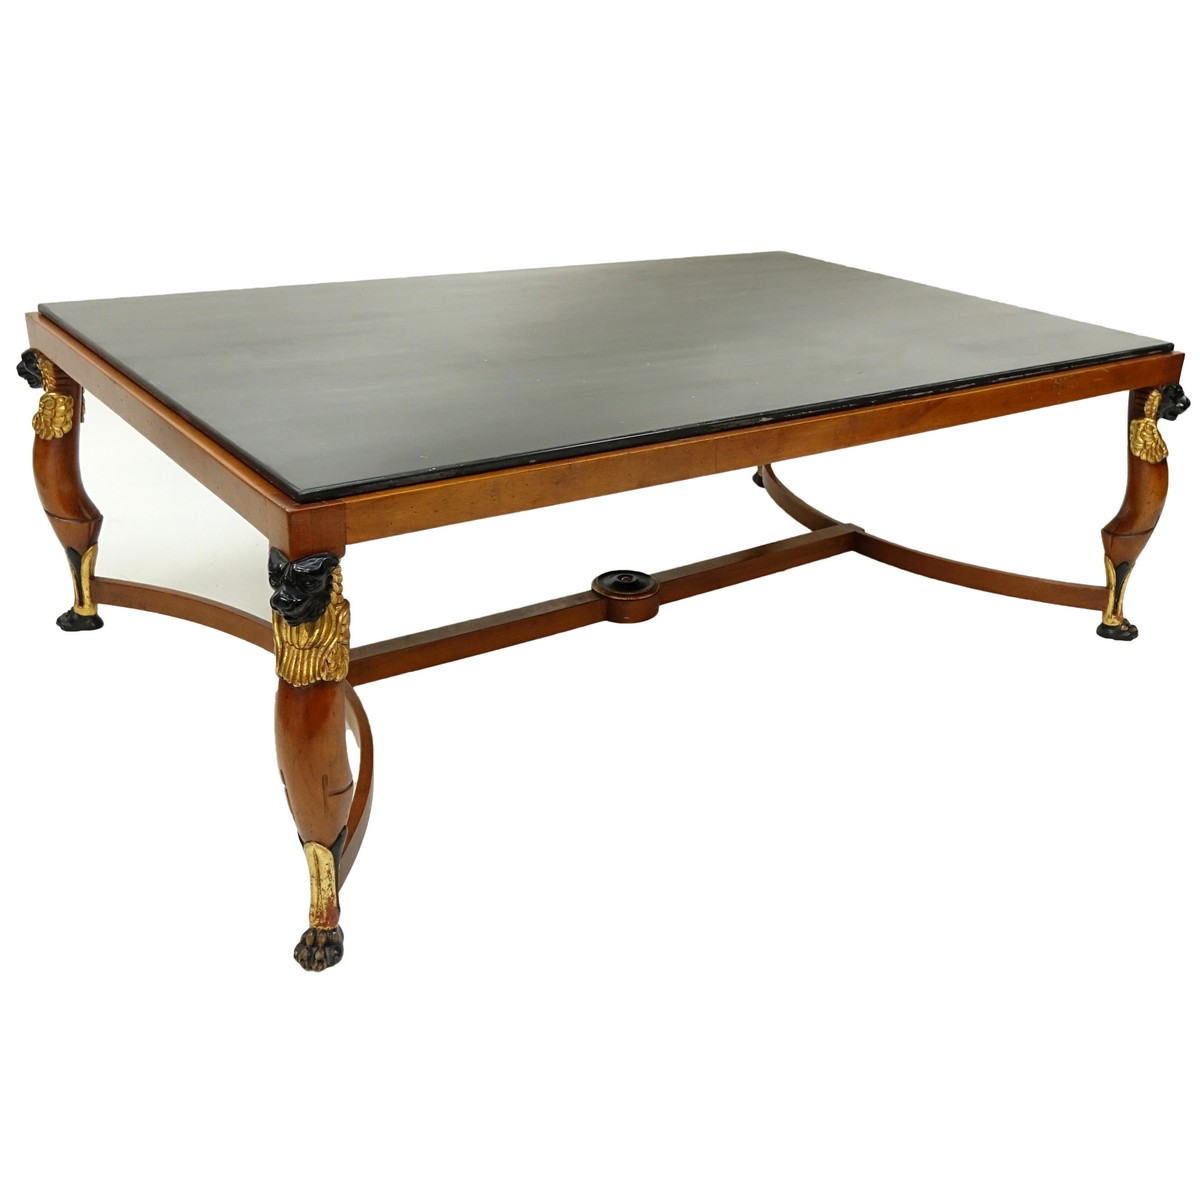 Mid Century Empire Style, Parcel Gilt, Egyptian Revival Carved Wood Marble Top Coffee Table. Typical scuffs to gilt and paint, light scratches, possible restoration to marble.